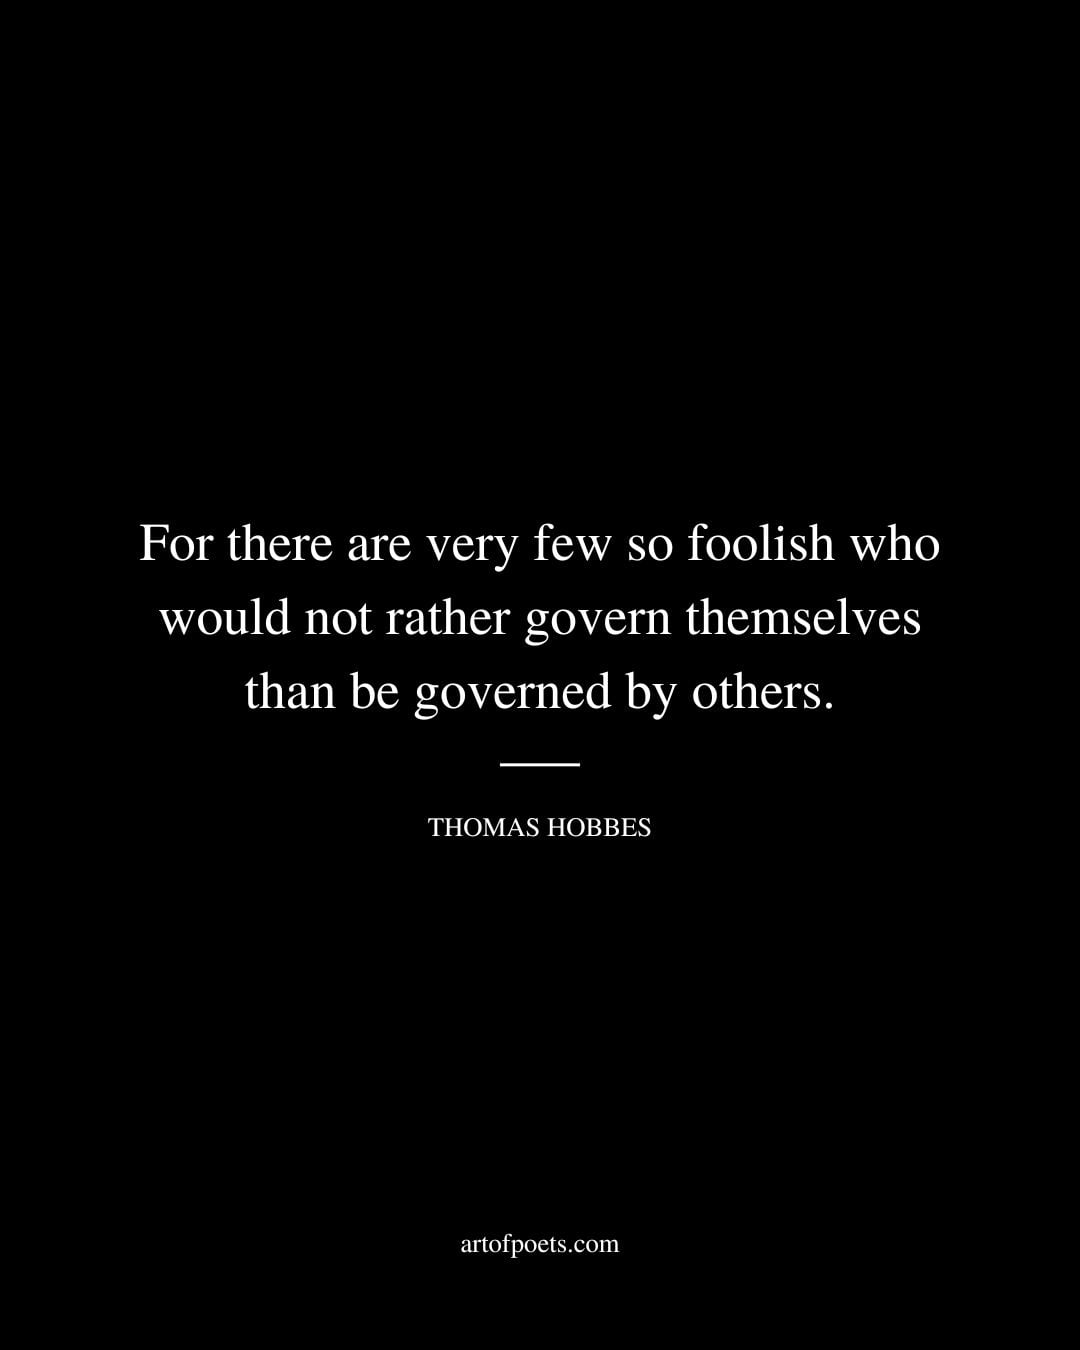 For there are very few so foolish who would not rather govern themselves than be governed by others